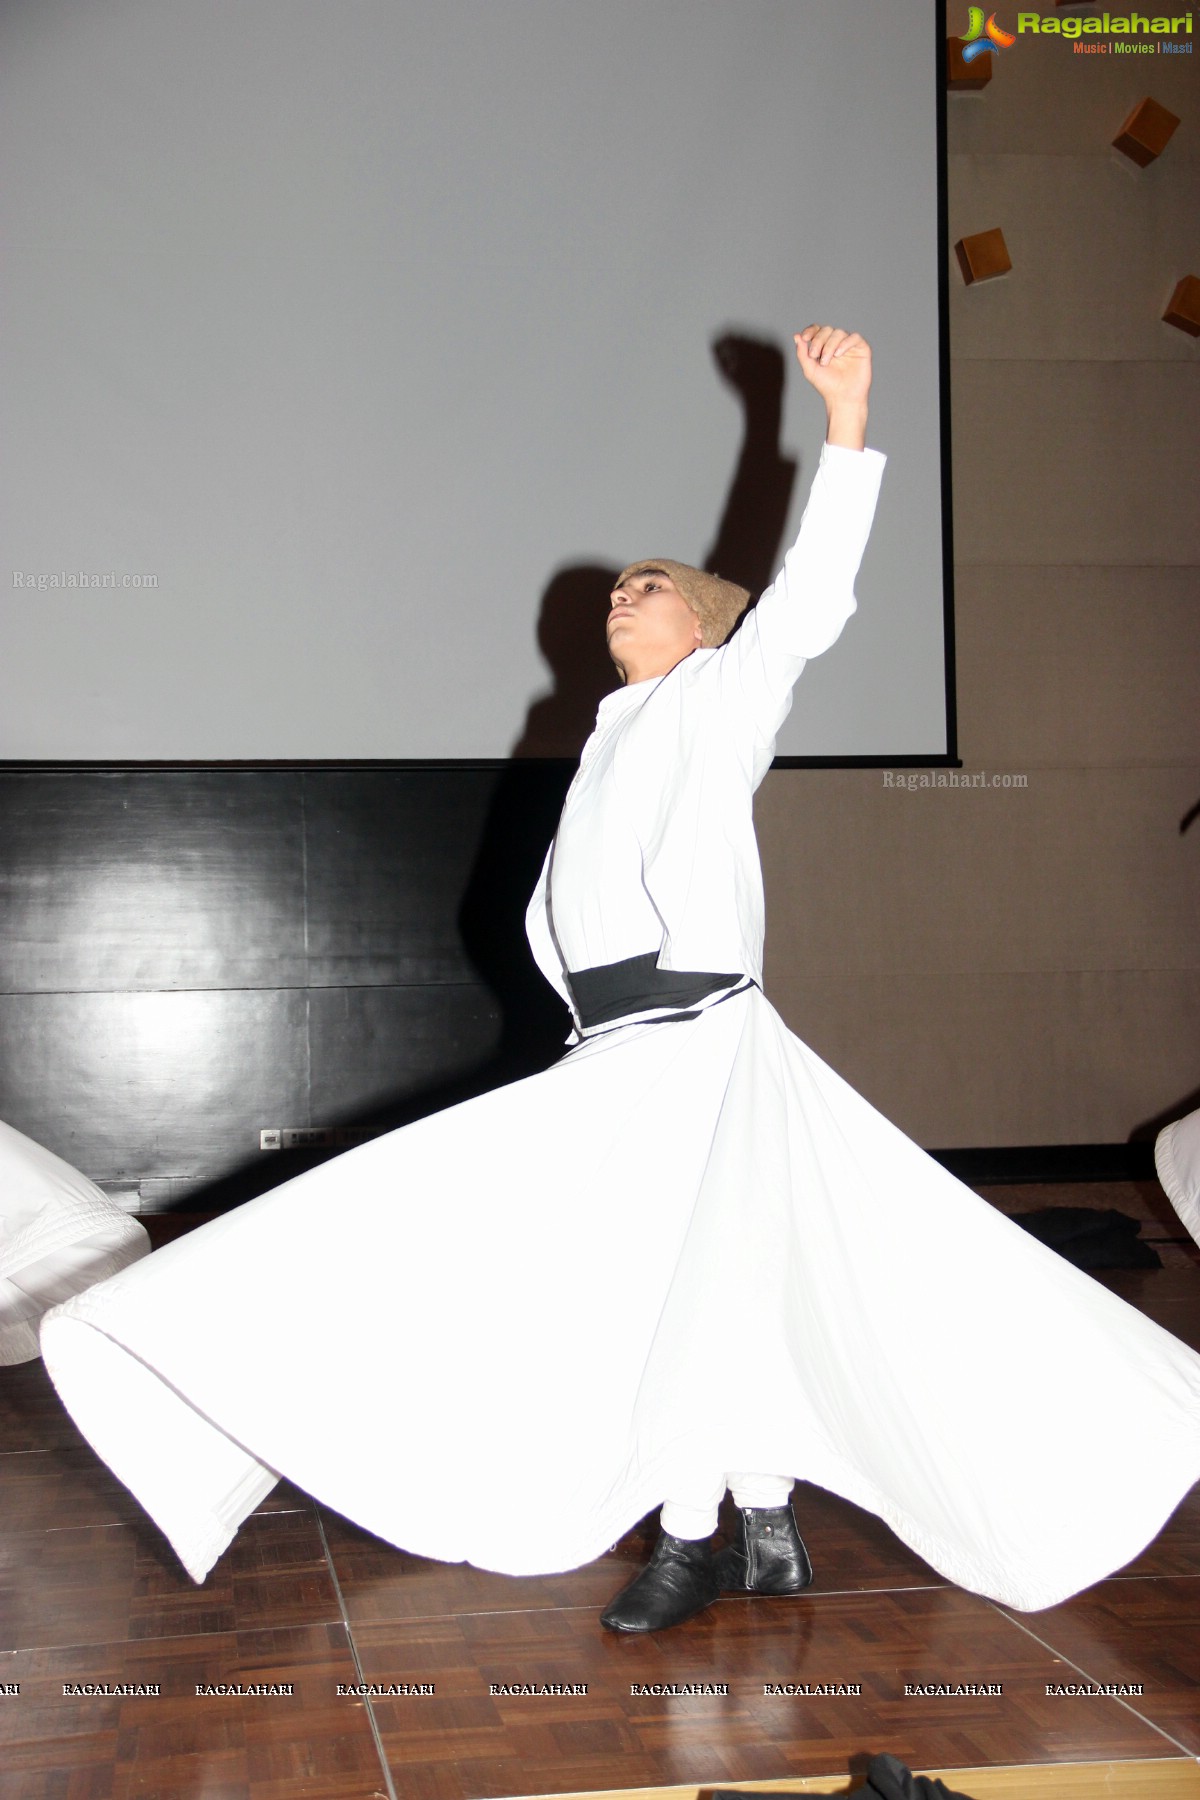 Dances by Whirling Dervishes from Turkey at Park Hyatt, Hyderabad